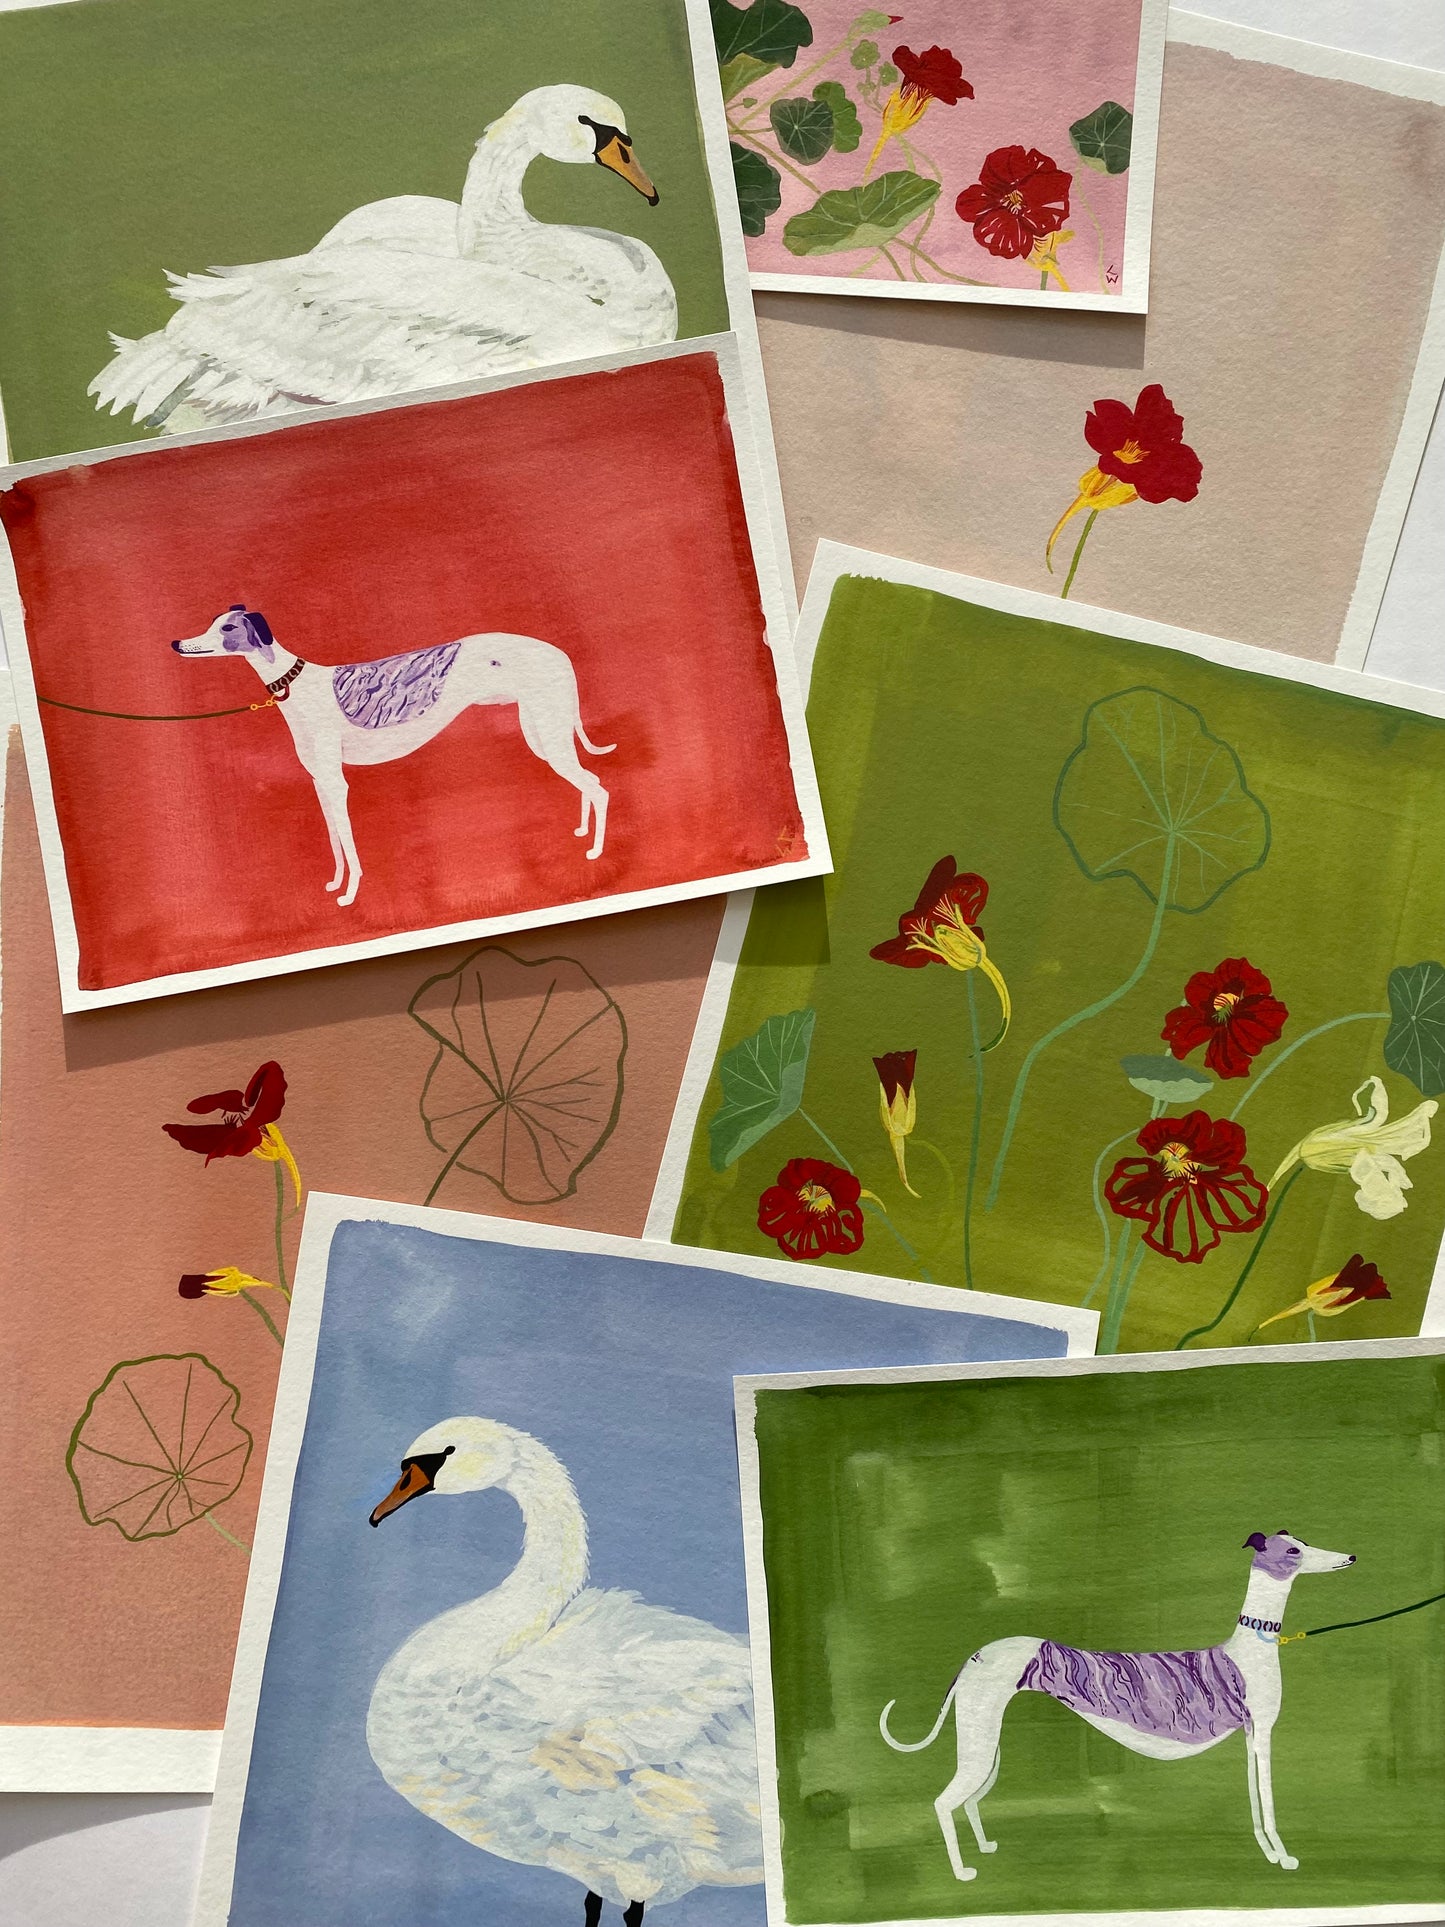 Lucy Wayne, ‘Whippet walk red’